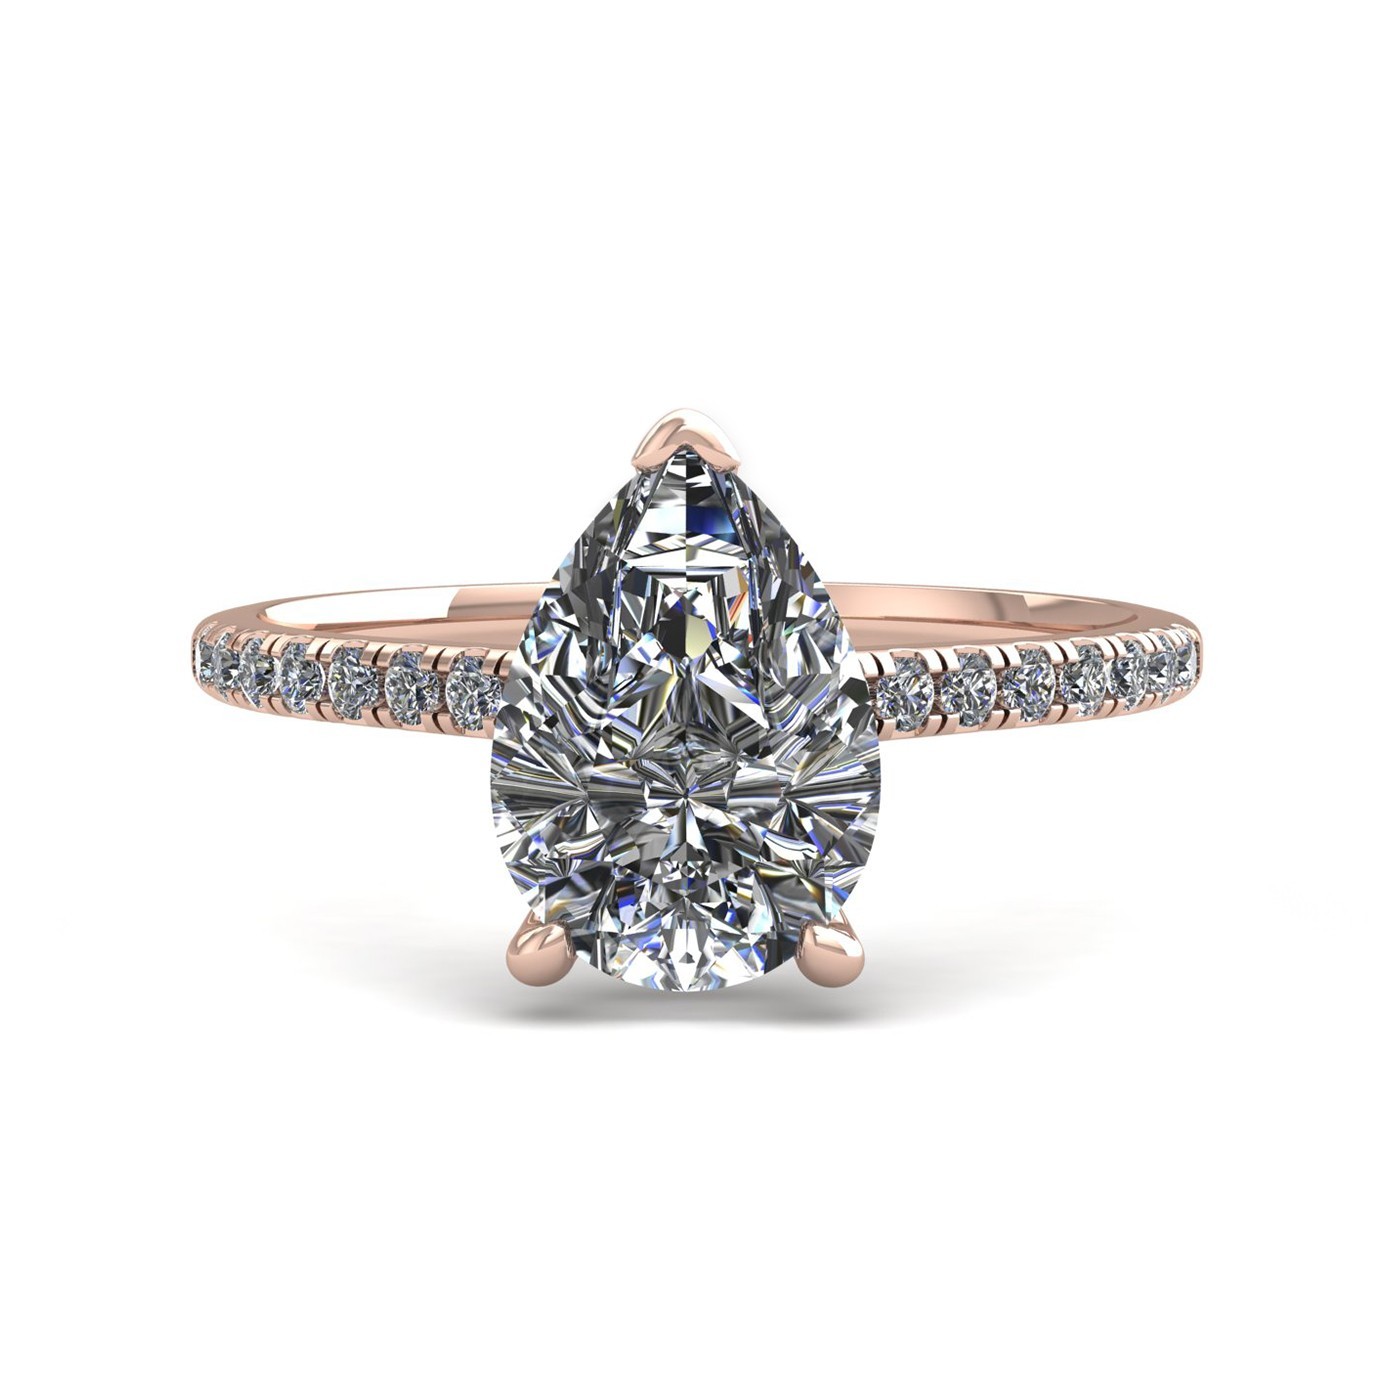 18k rose gold 2,50 ct 3 prongs pear diamond engagement ring with whisper thin pavÉ set band Photos & images